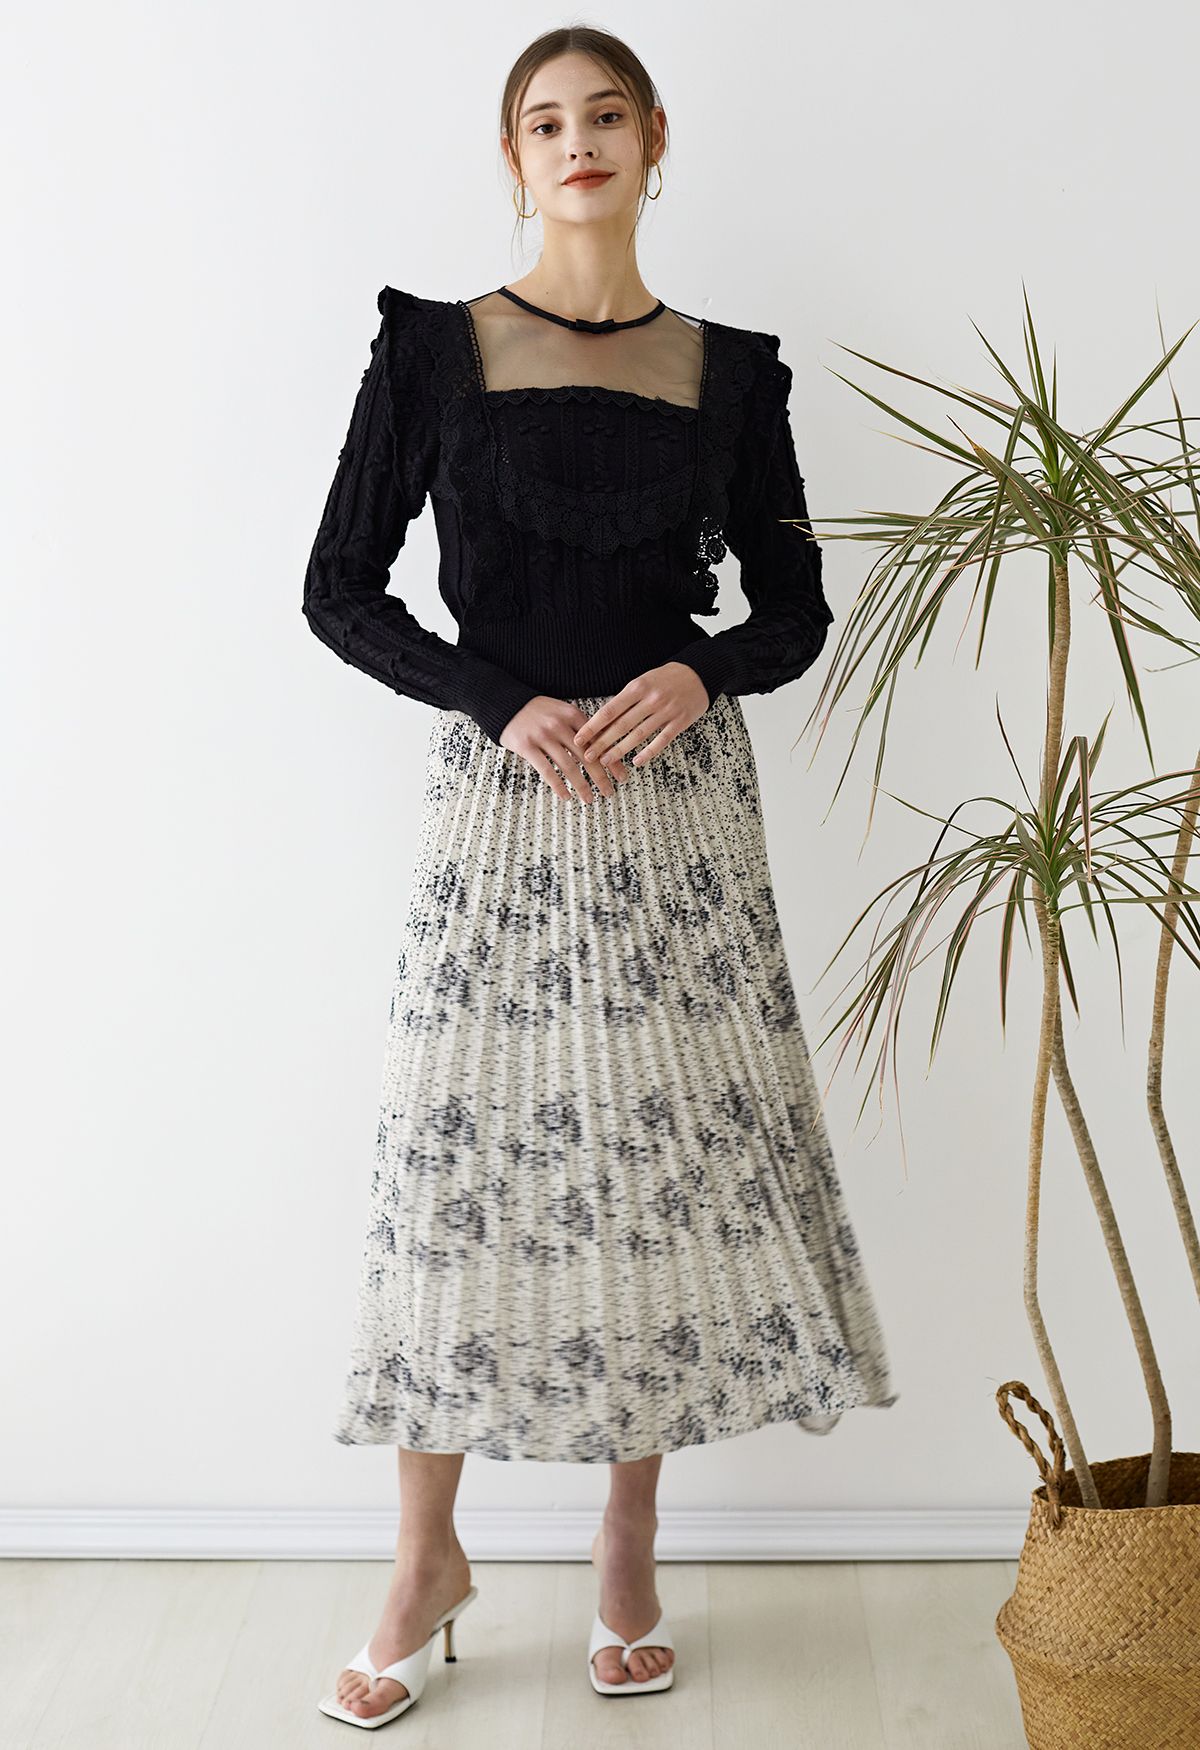 Floret and Spot Print Pleated Midi Skirt in Ivory